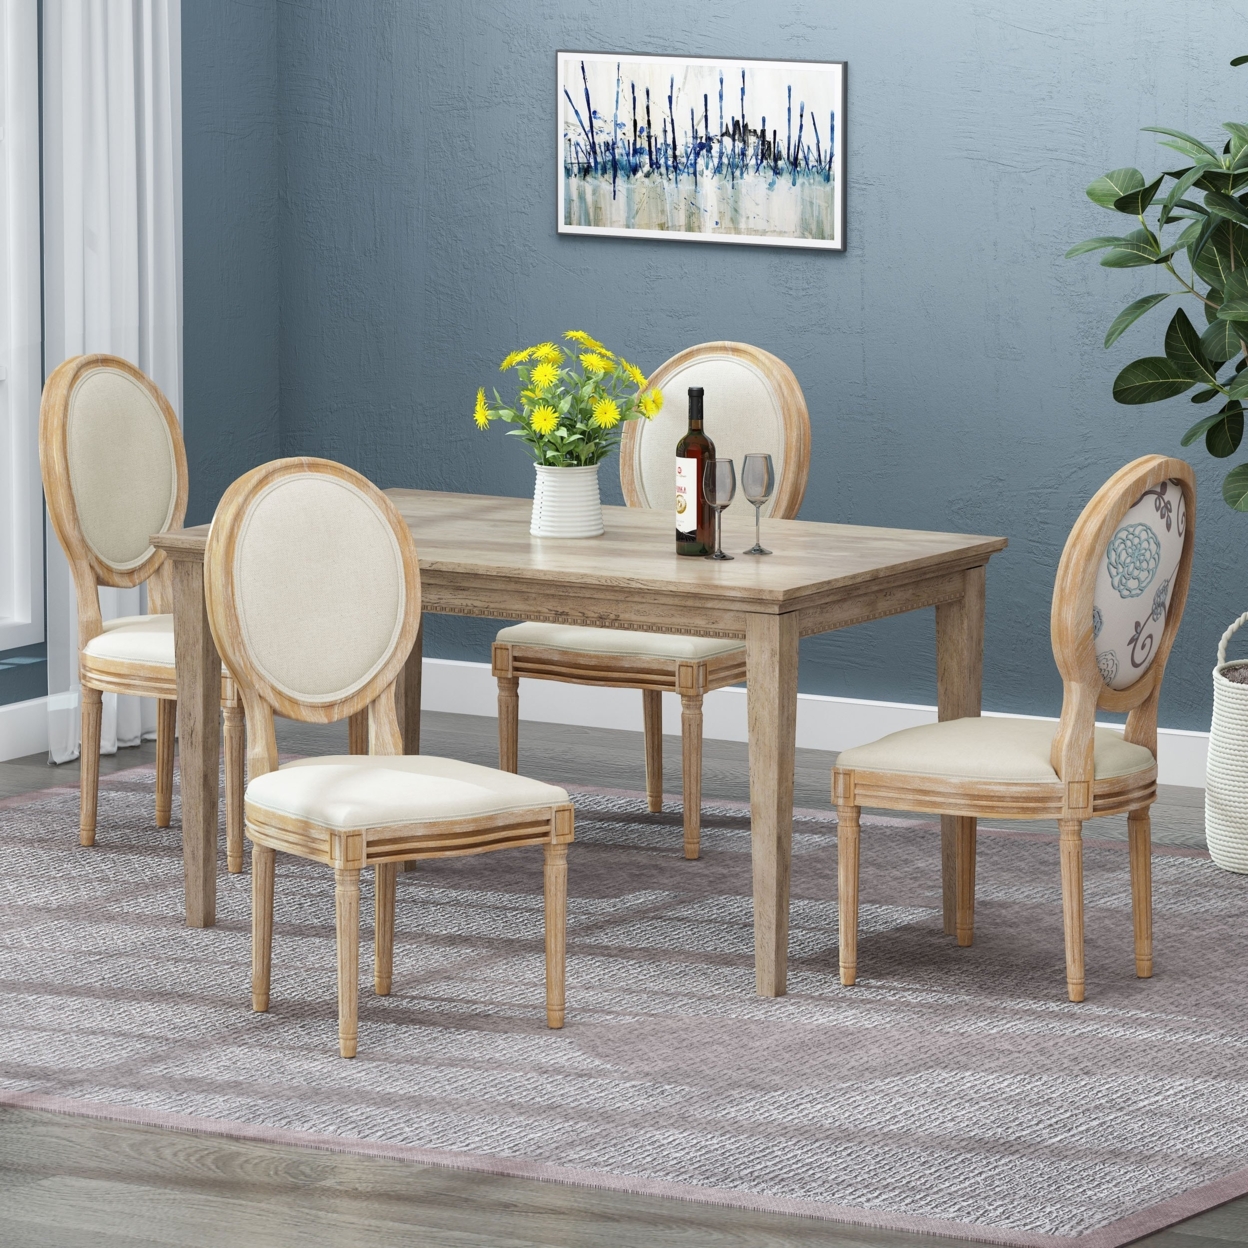 Lariya French Country Dining Chairs (Set Of 4) - Light Beige With Blue Floral/natural